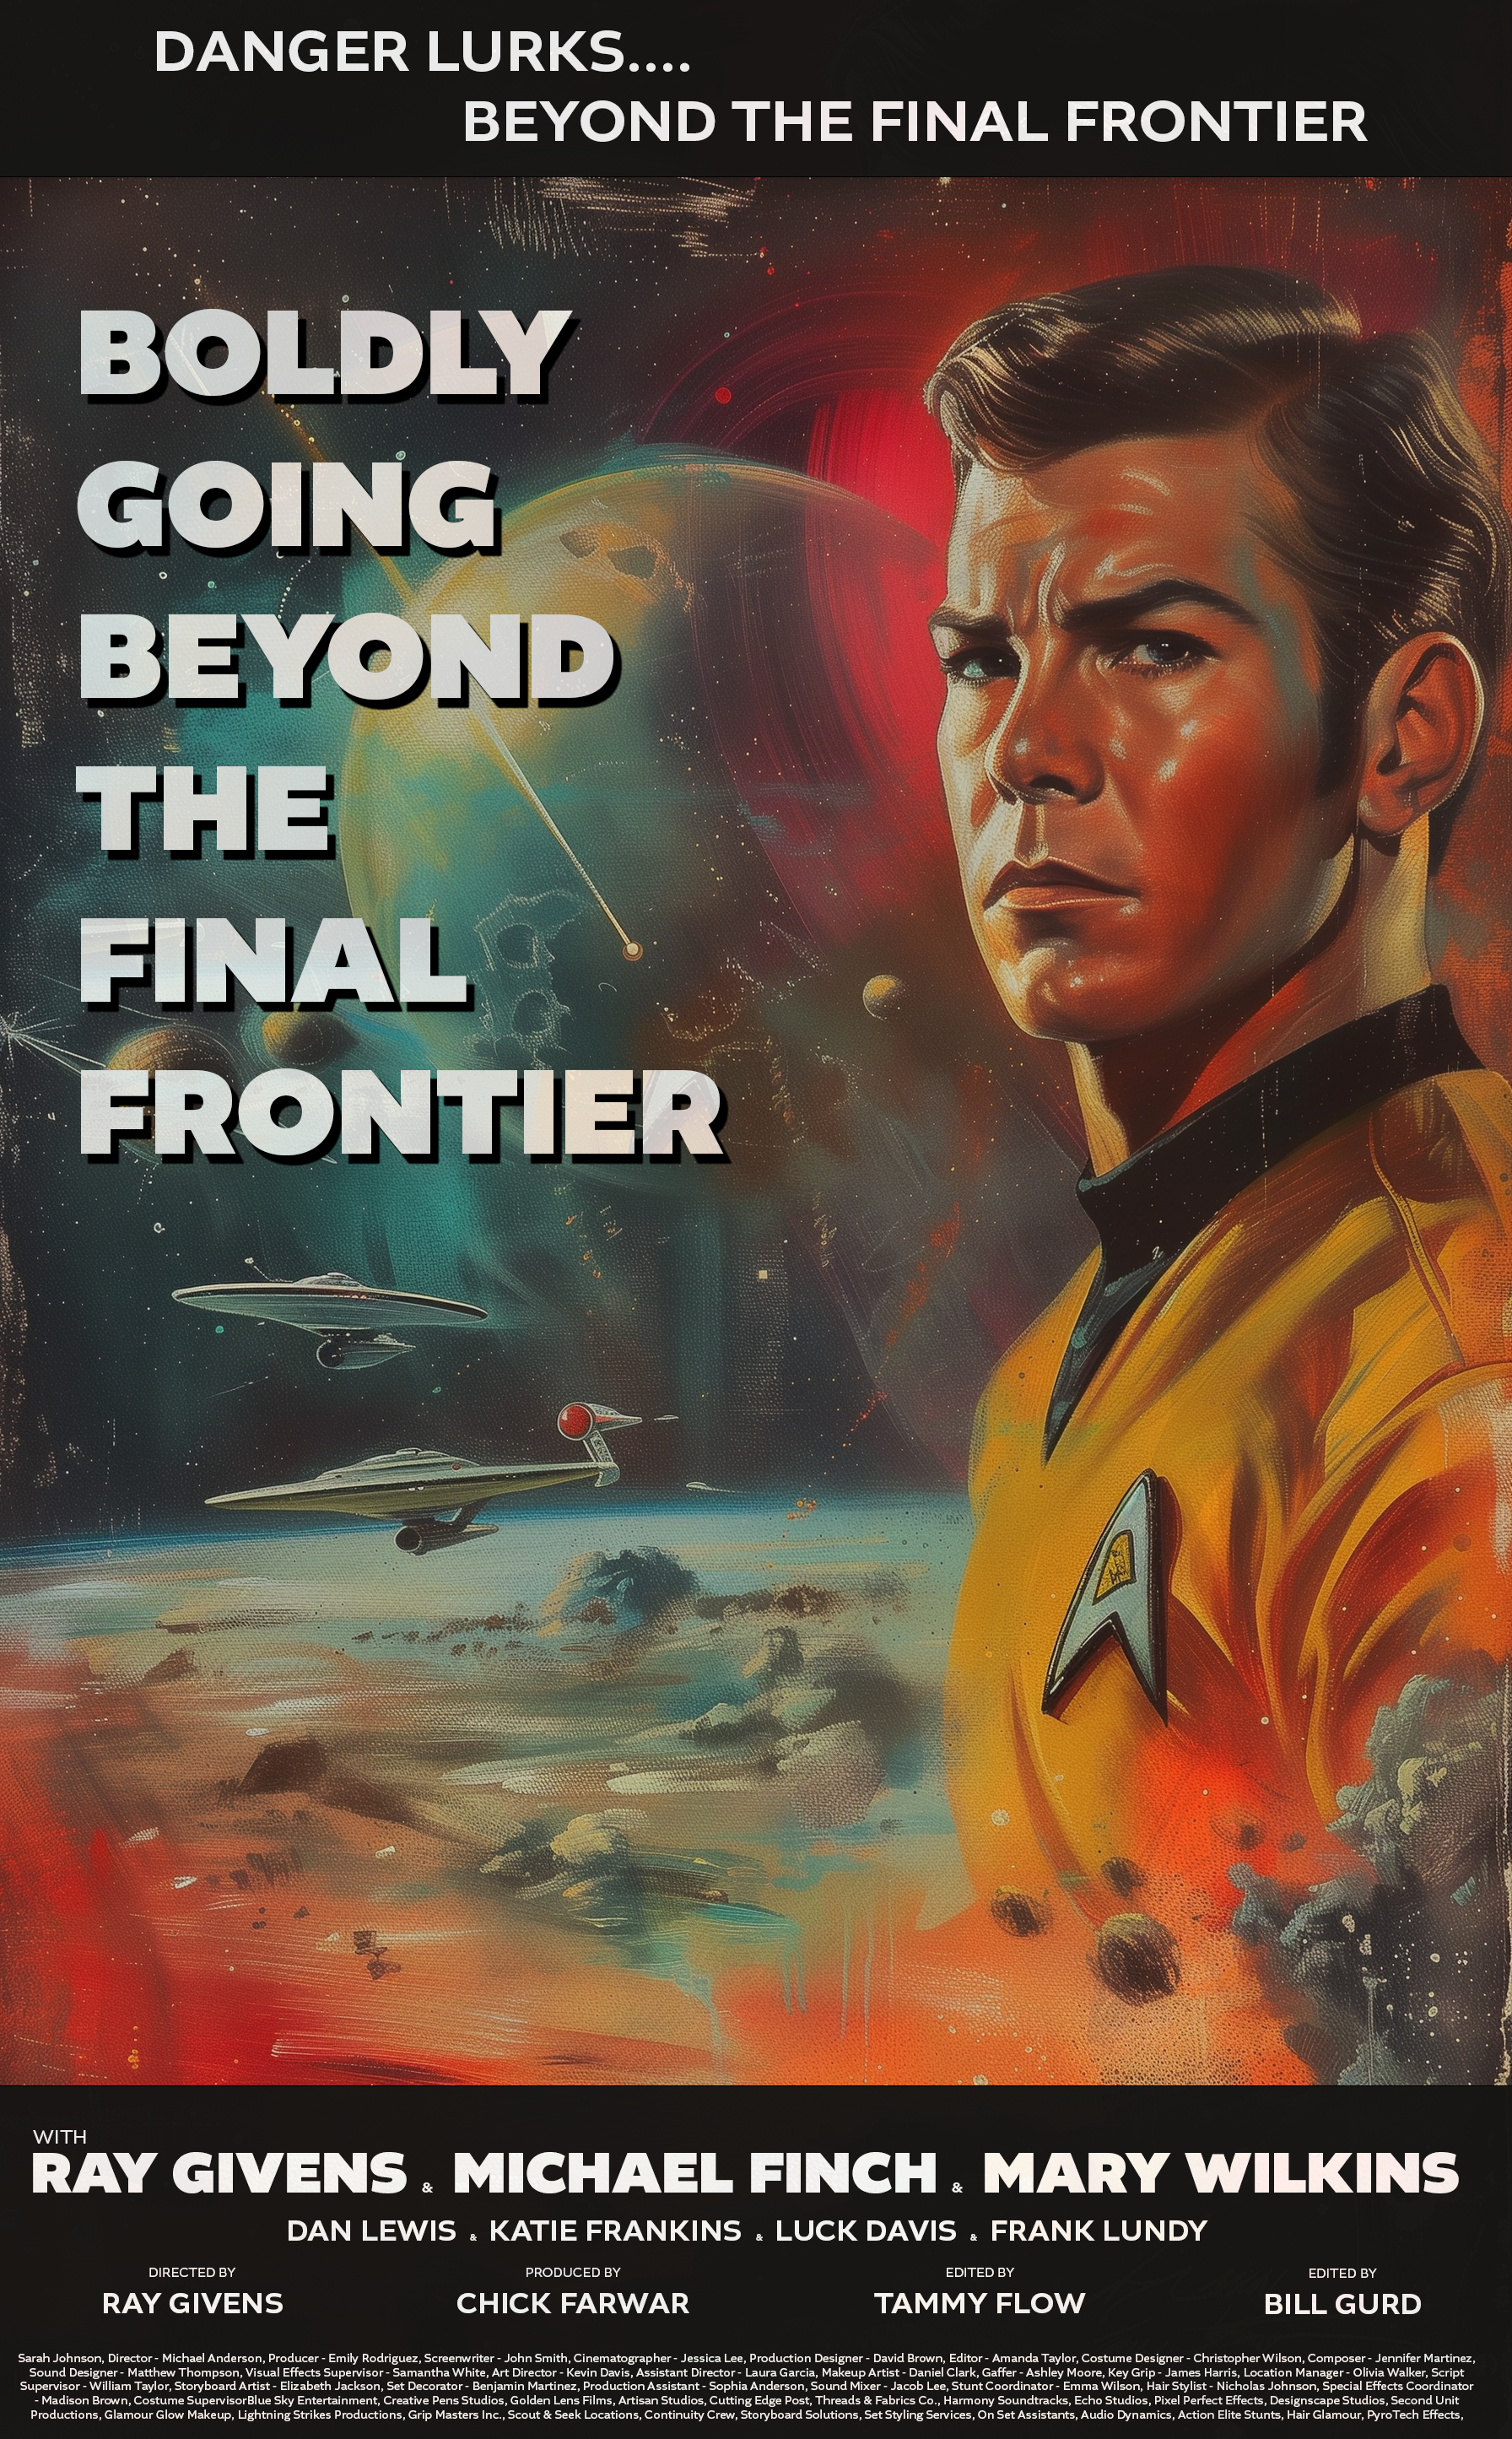 Name:  Beyond the Final Frontier.png
Views: 155
Size:  8.19 MB